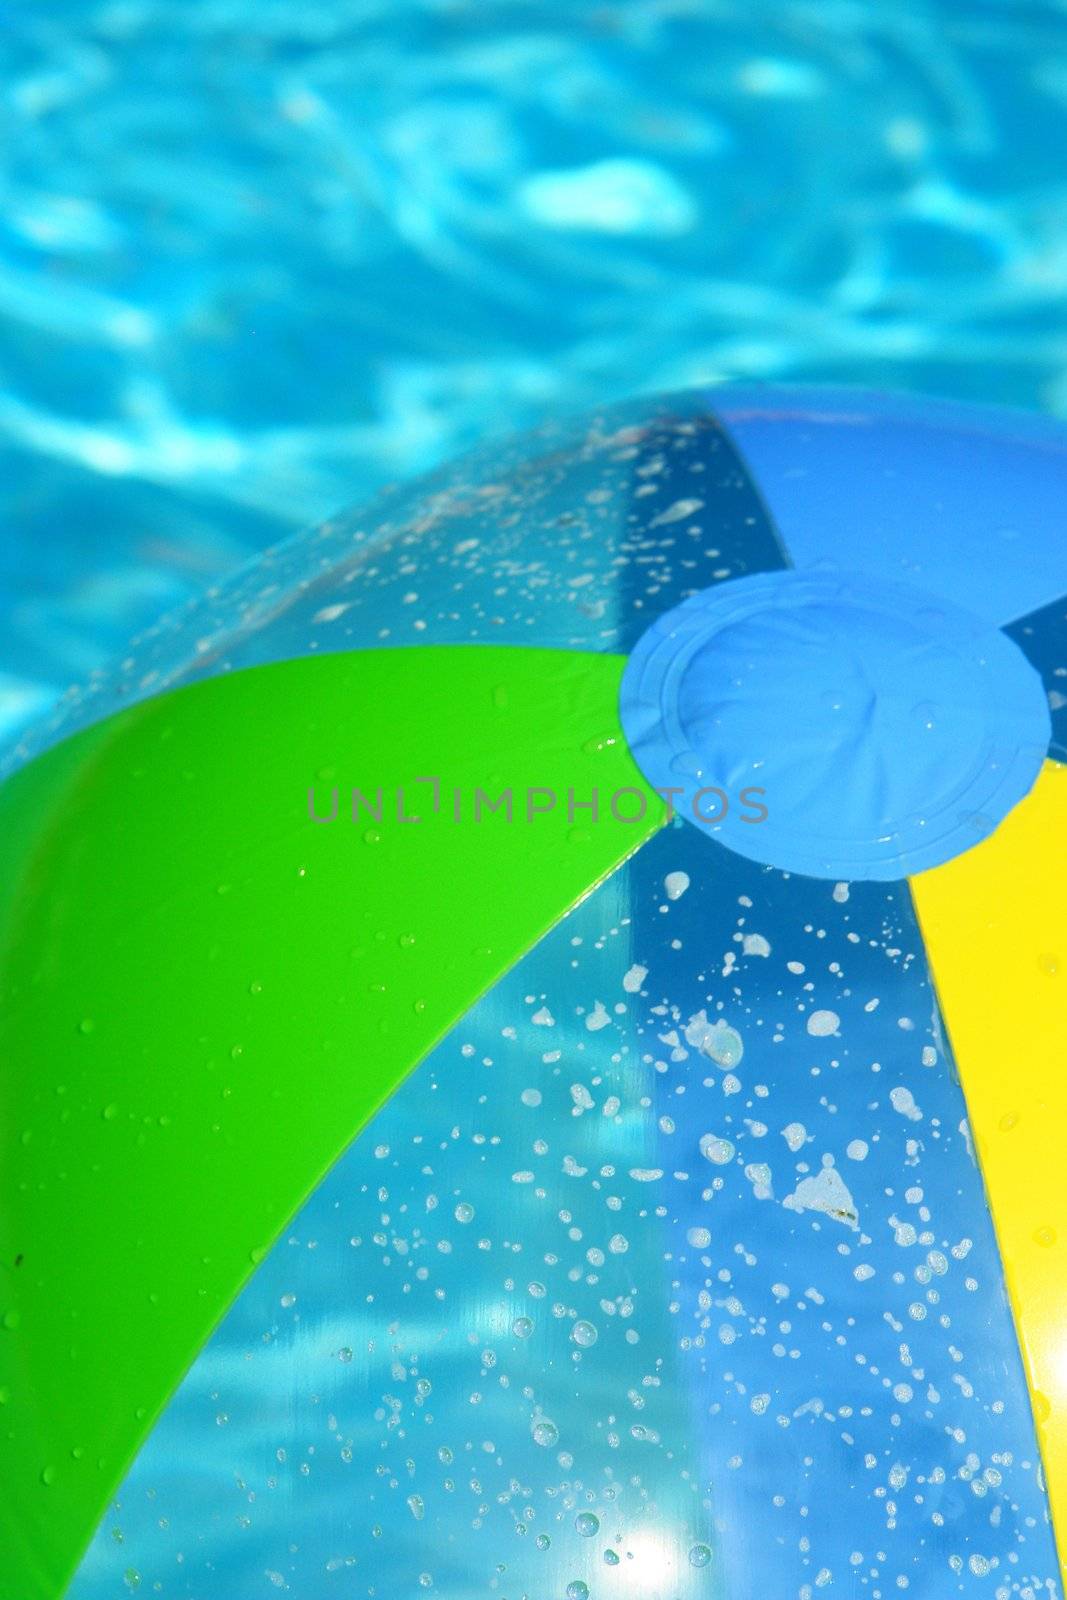 A colorful beach ball floating on the swimming pool.